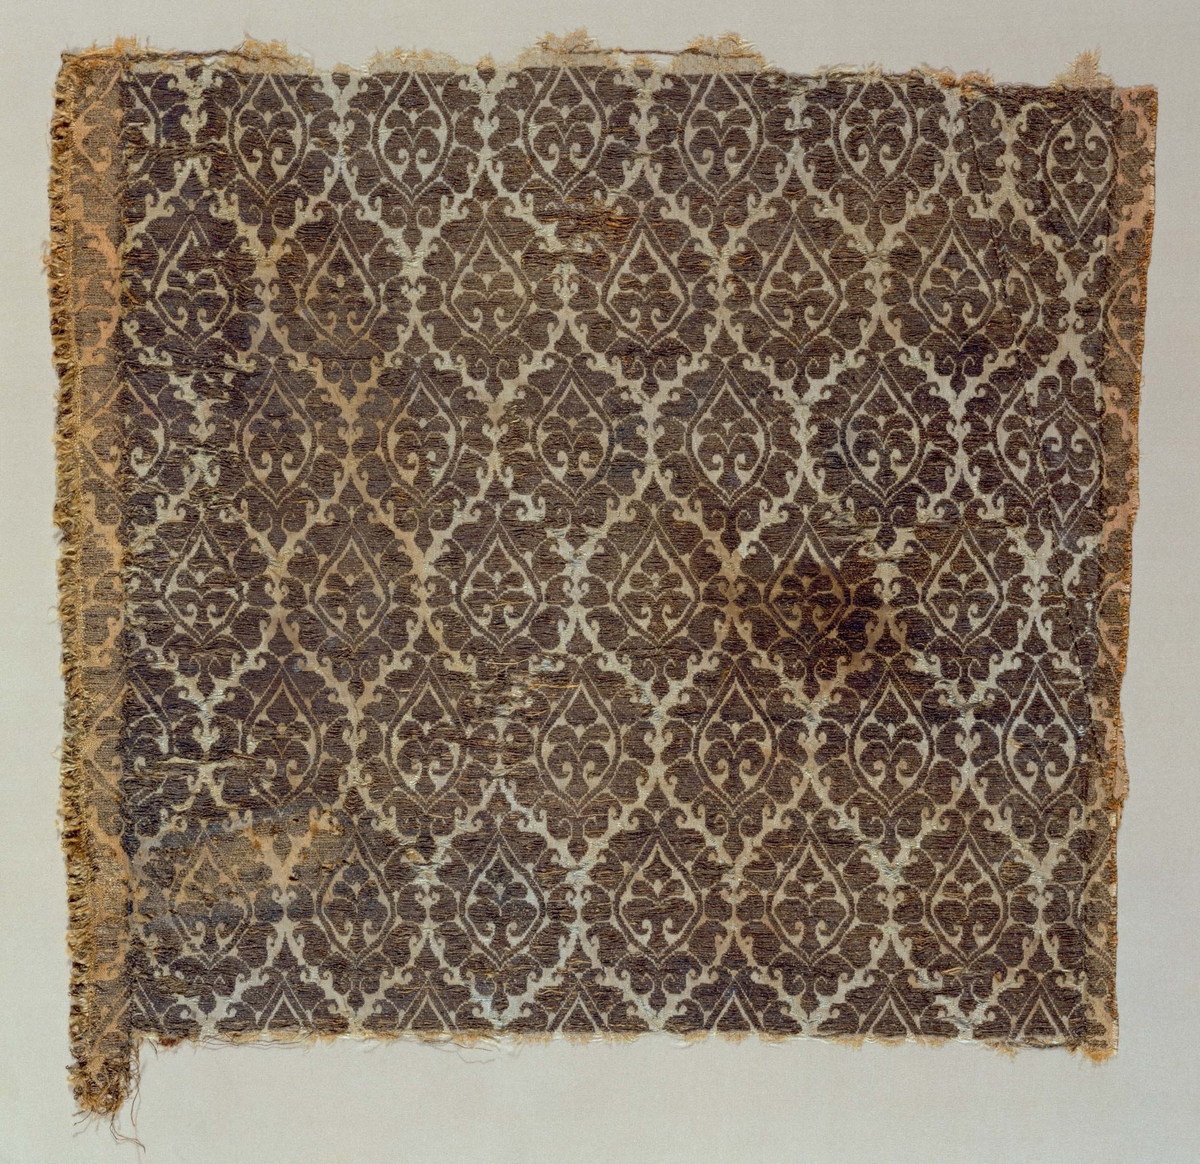 Textile with Palmettes in Lotus Medallions